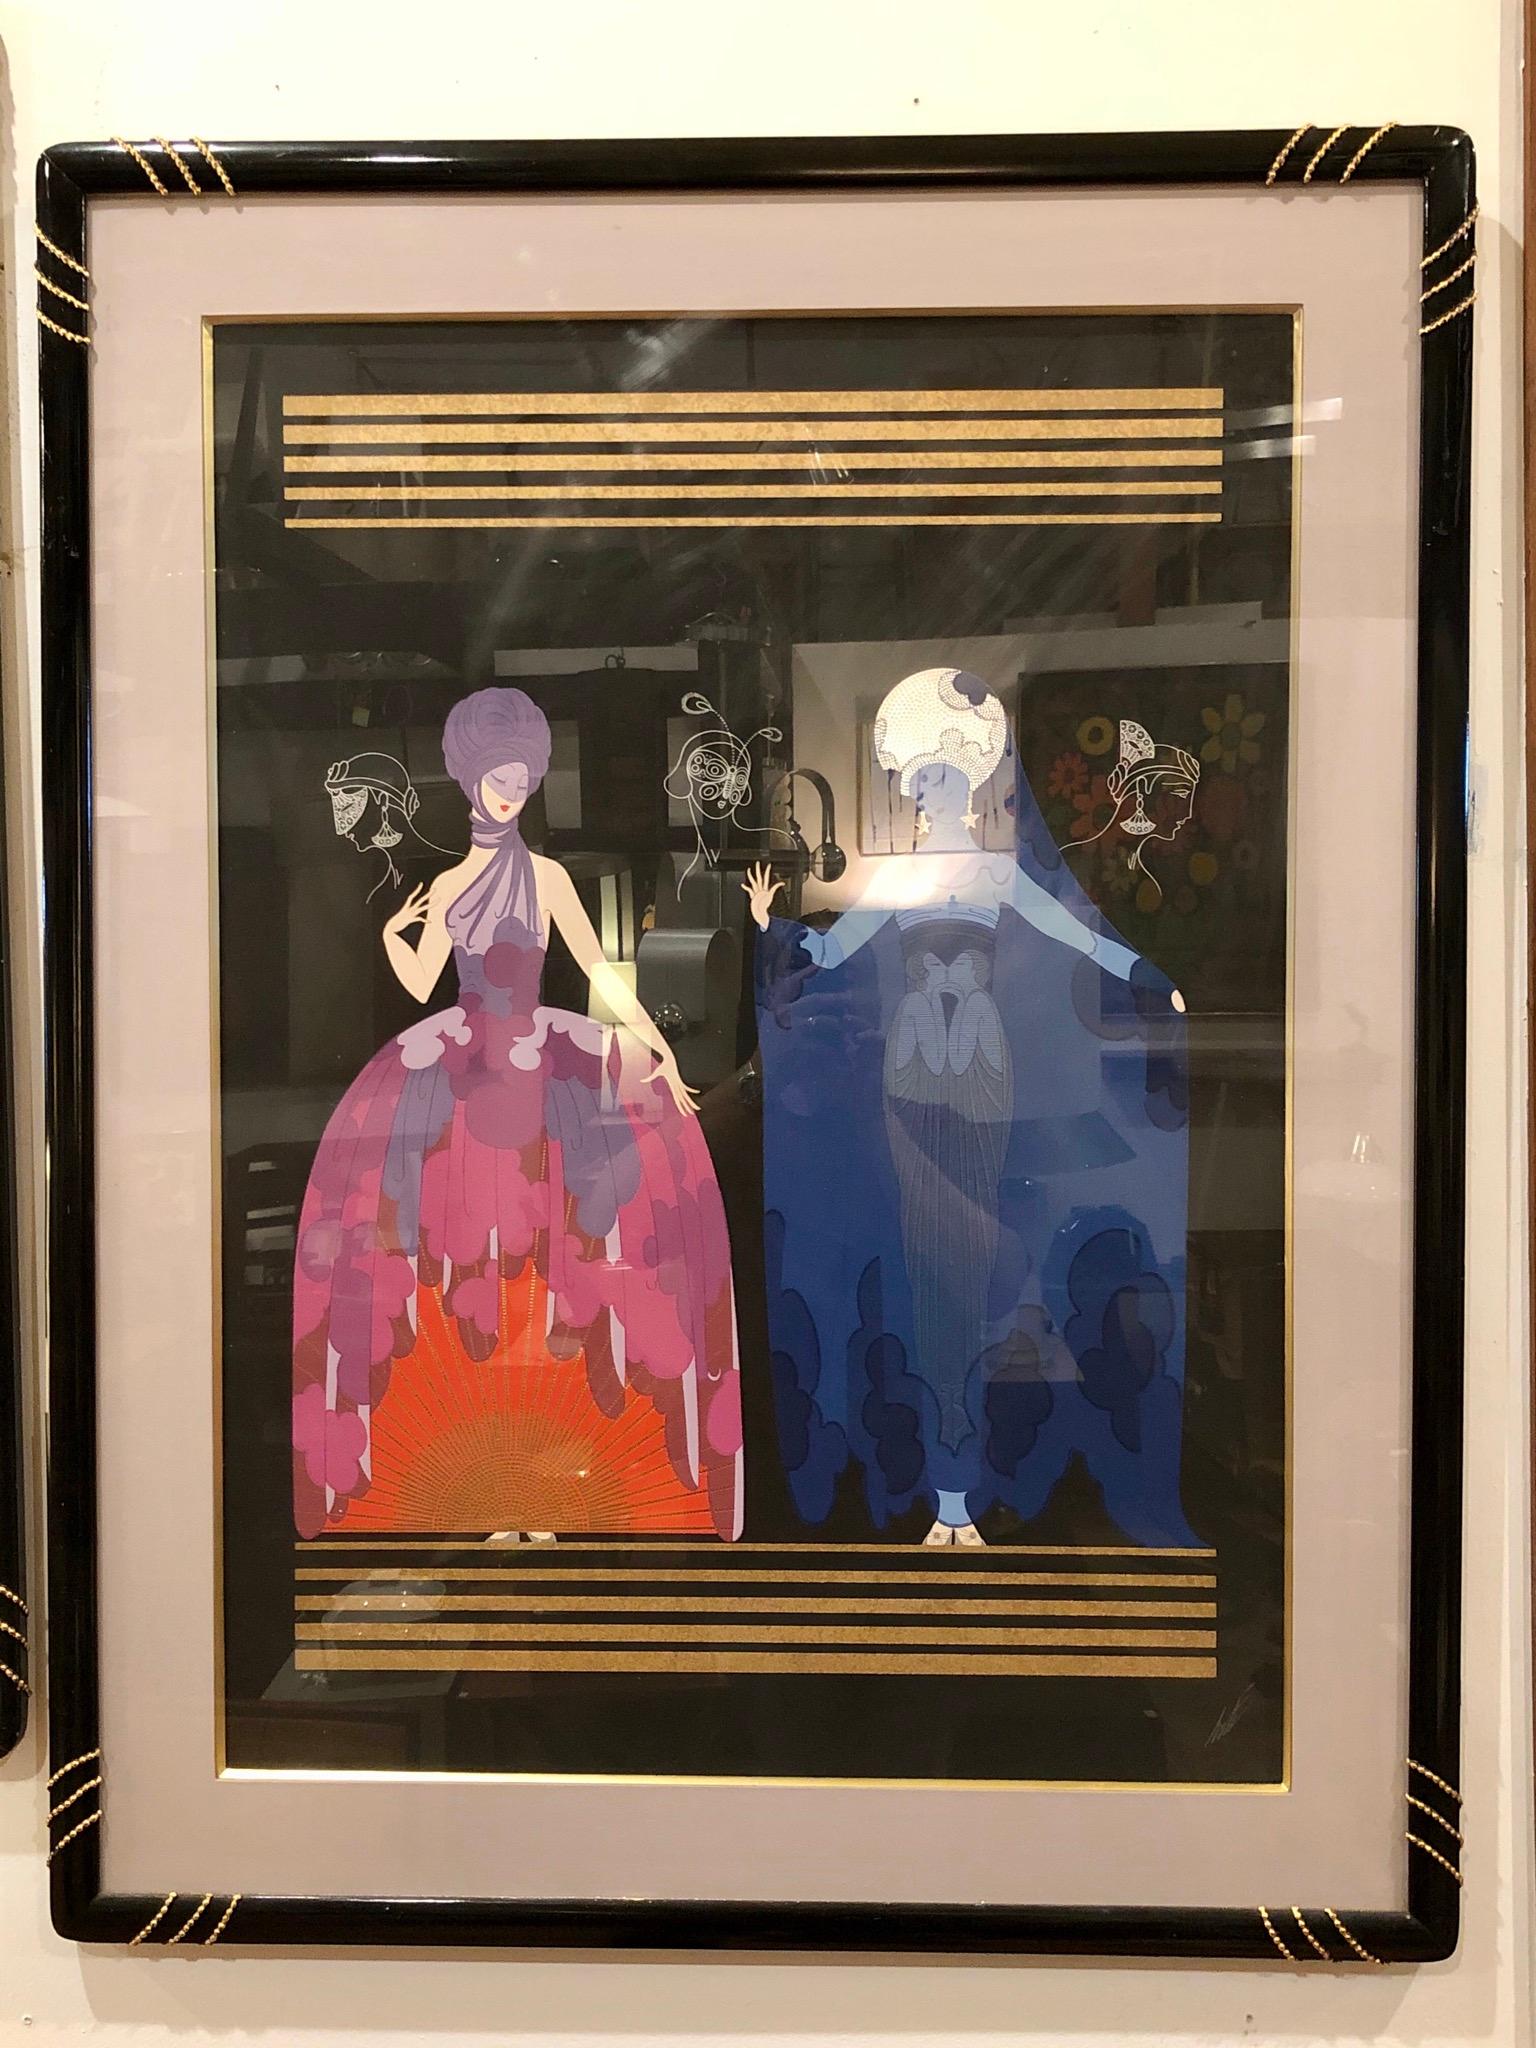 A beautiful large serigraph by Erté circa 1980s, framed with plexiglass, circa 1980s.